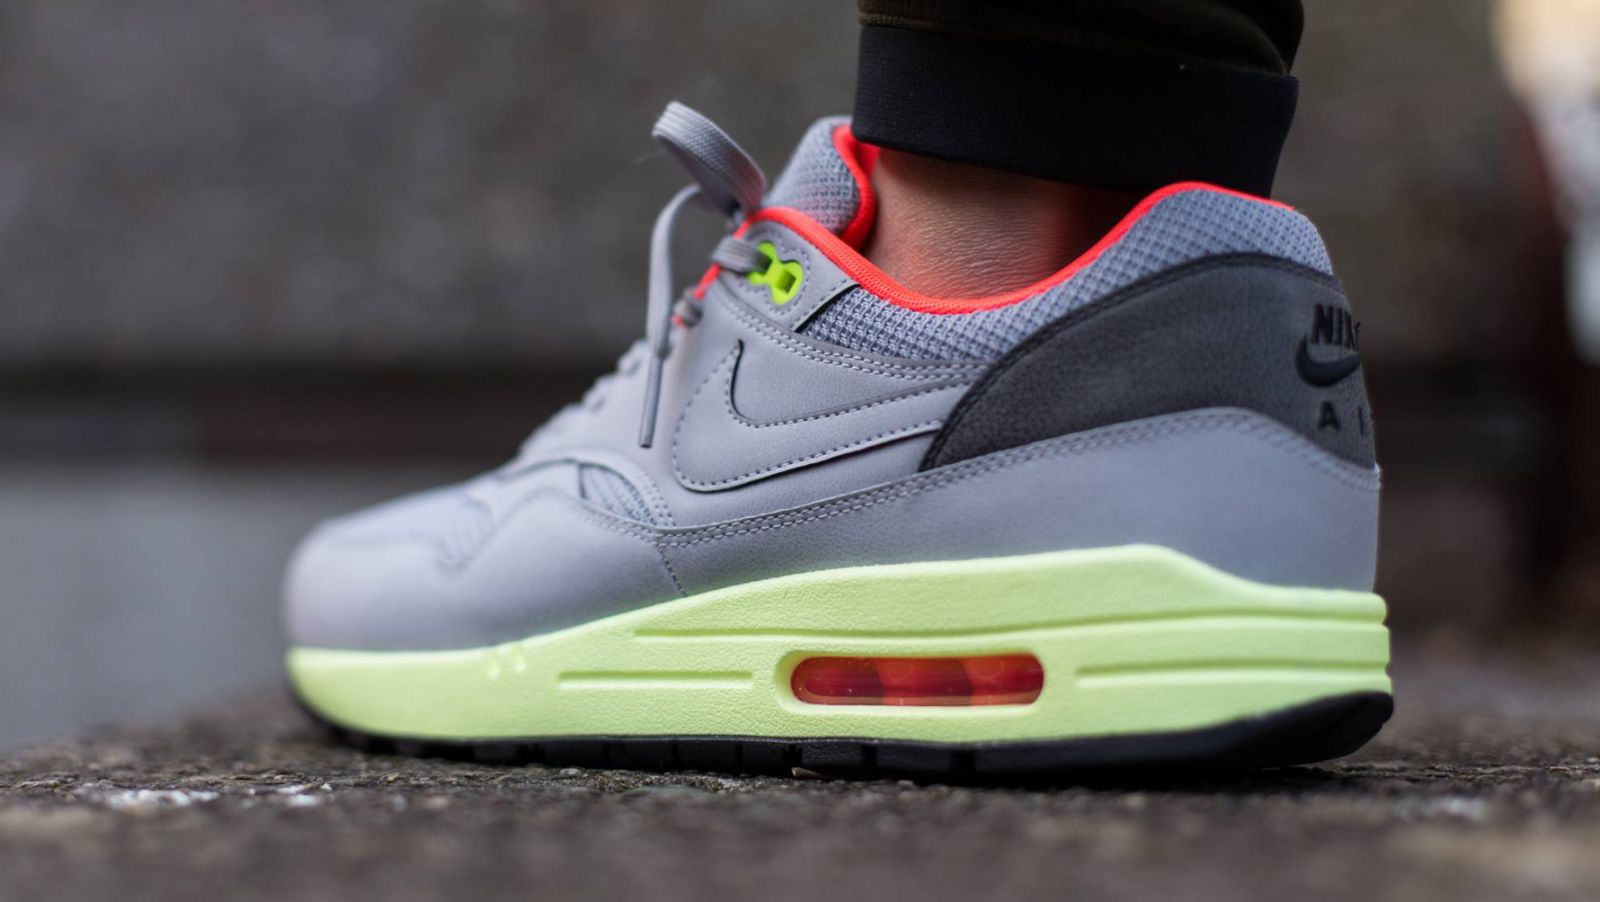 Doodt Mathis Klas Don't Call It a 'Yeezy' Nike Air Max 1 | Complex